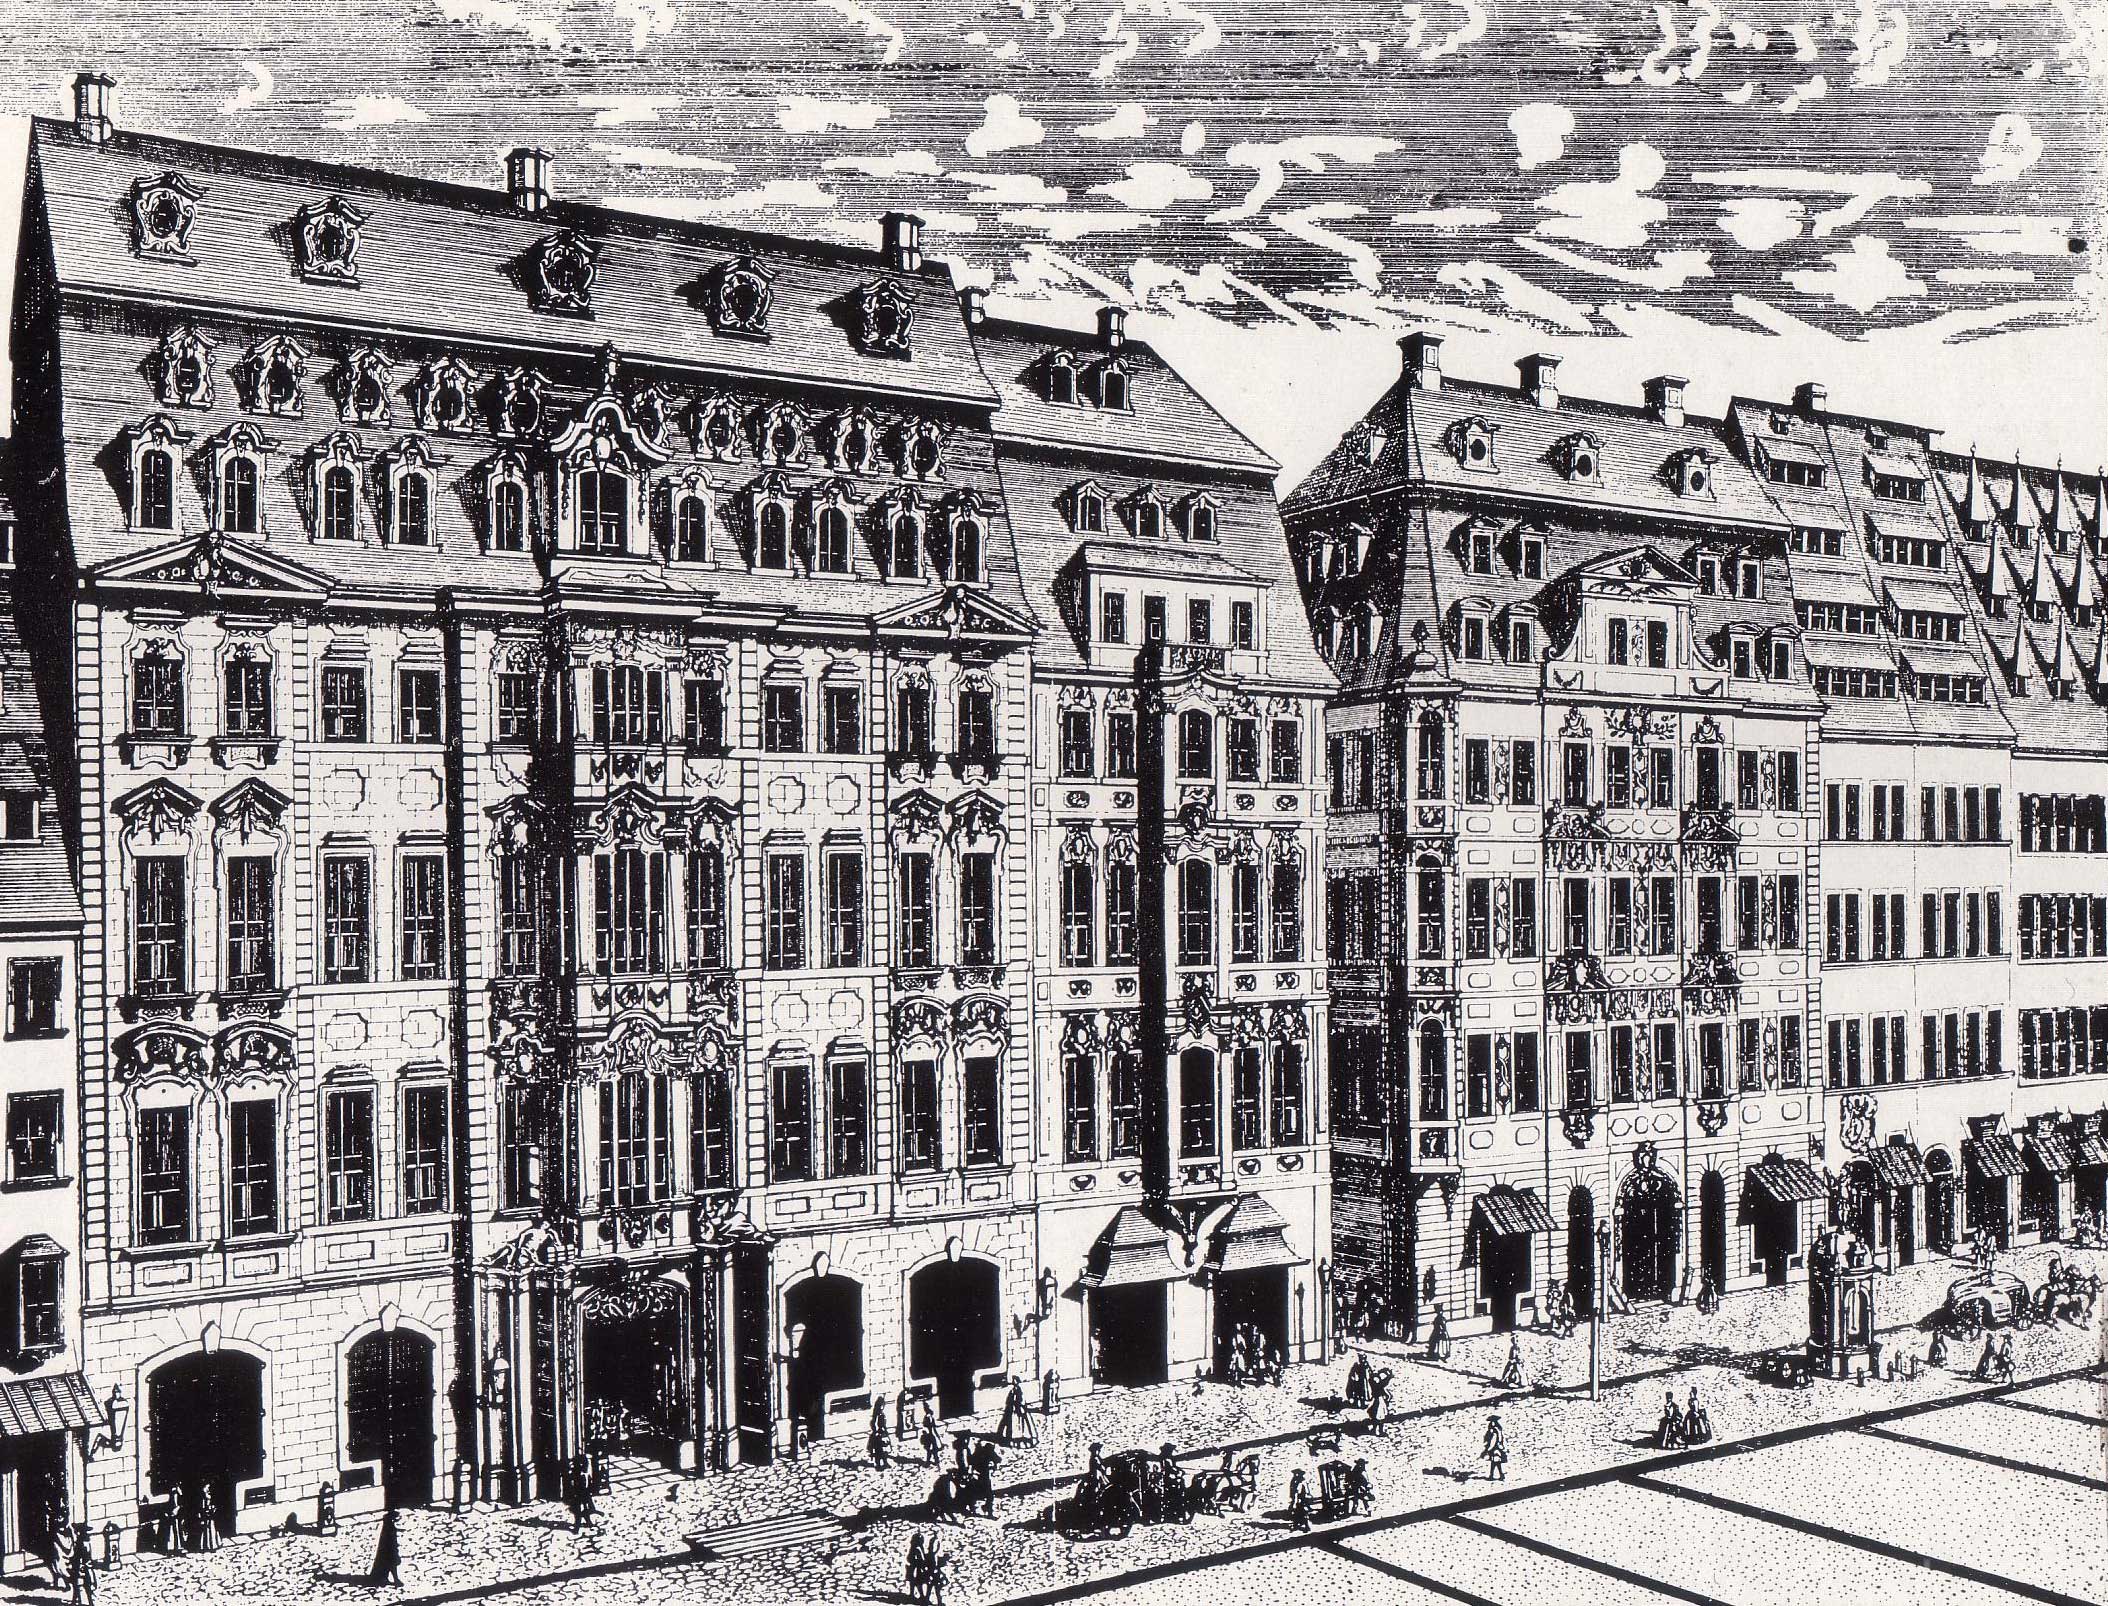 Katharinenstraße 16, 14 and 12, engraving by Johann George Schreiber in 1720. Number 14, the house in the middle, is Café Zimmermann, home of the musical ensemble Collegium Musicum, which Bach led from 1729 to 1741. The house was destroyed during a heavy Allied air raid on December 4th, 1943.